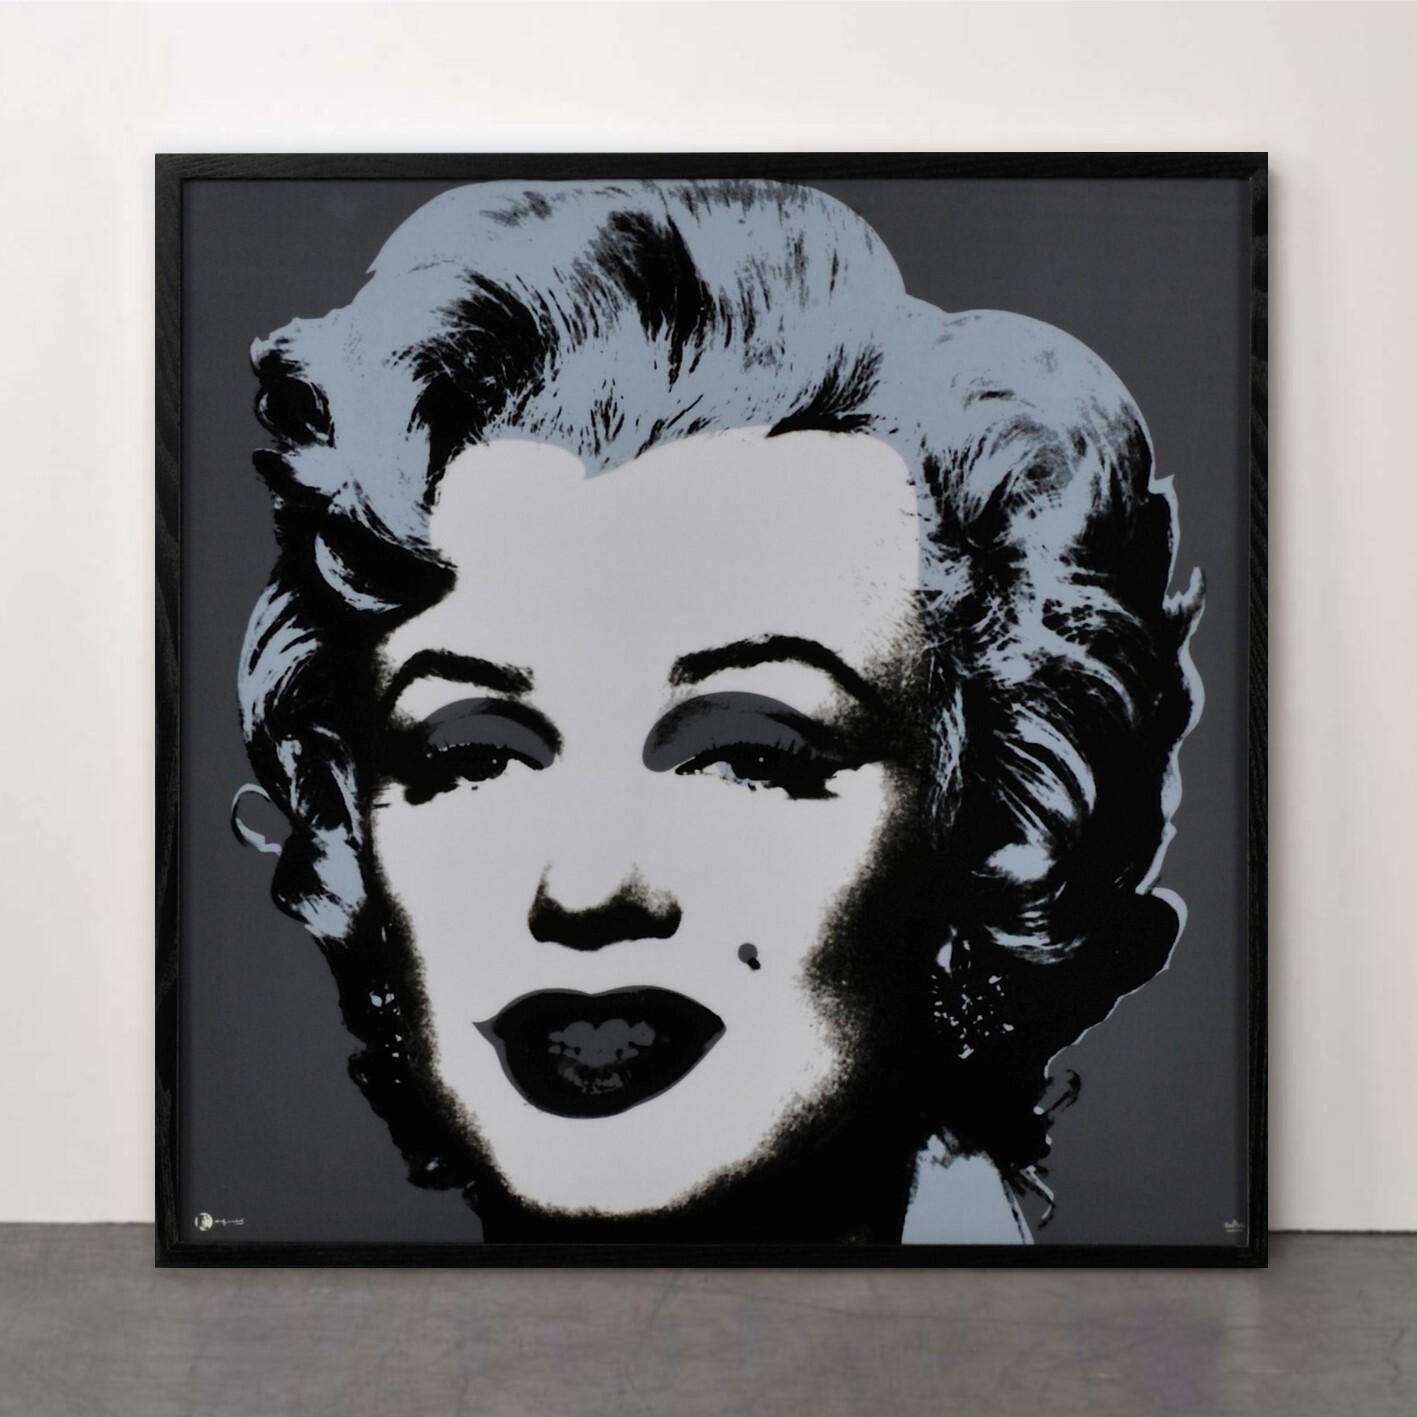 ANDY WARHOL (after)
Marilyn Silver, 2010
Porcelain
Edition of 49
51 x 51 cm (20.1 x 20.1 in.)
Facsimile signature in glaze, numbered on the reverse on label In wooden box, accompanied by Certificate of Authenticity from the Rosenthal Studio in